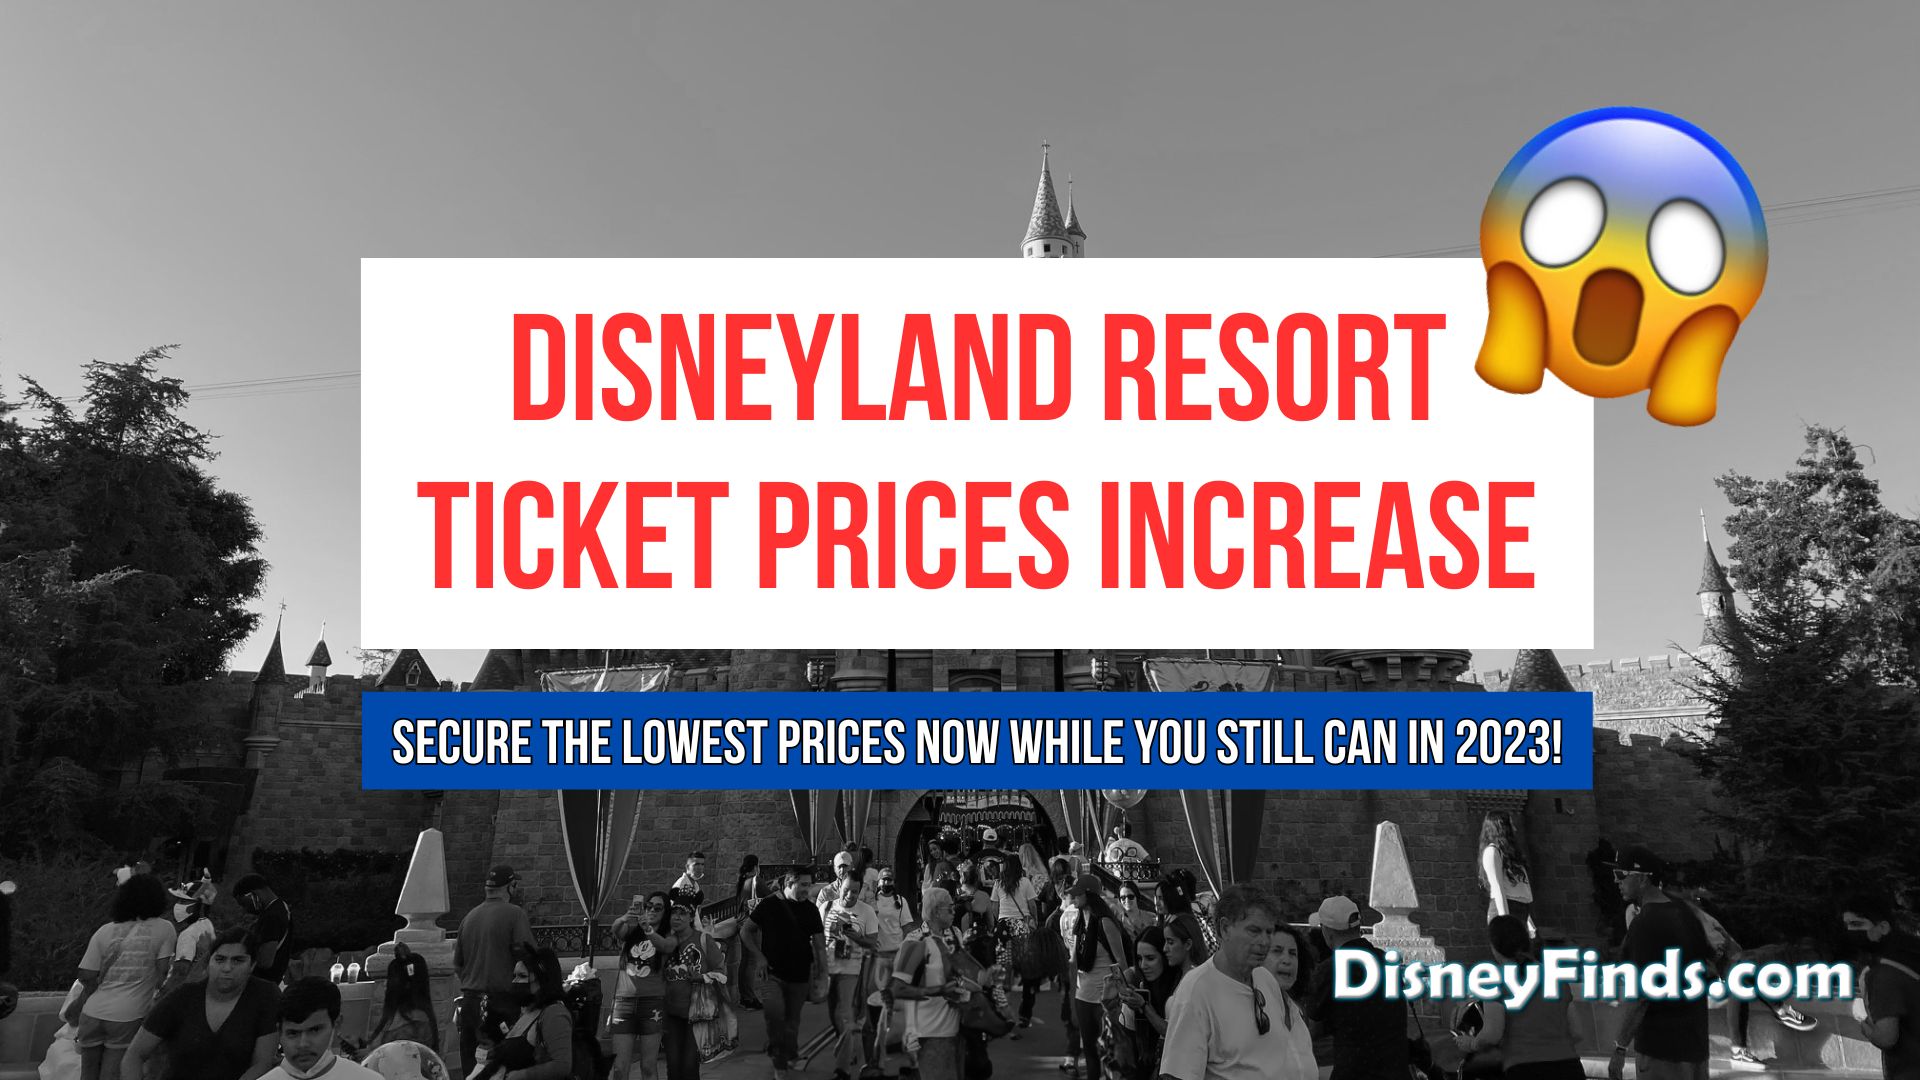 Disneyland Resort Ticket Prices Increase Secure the Lowest Prices Now